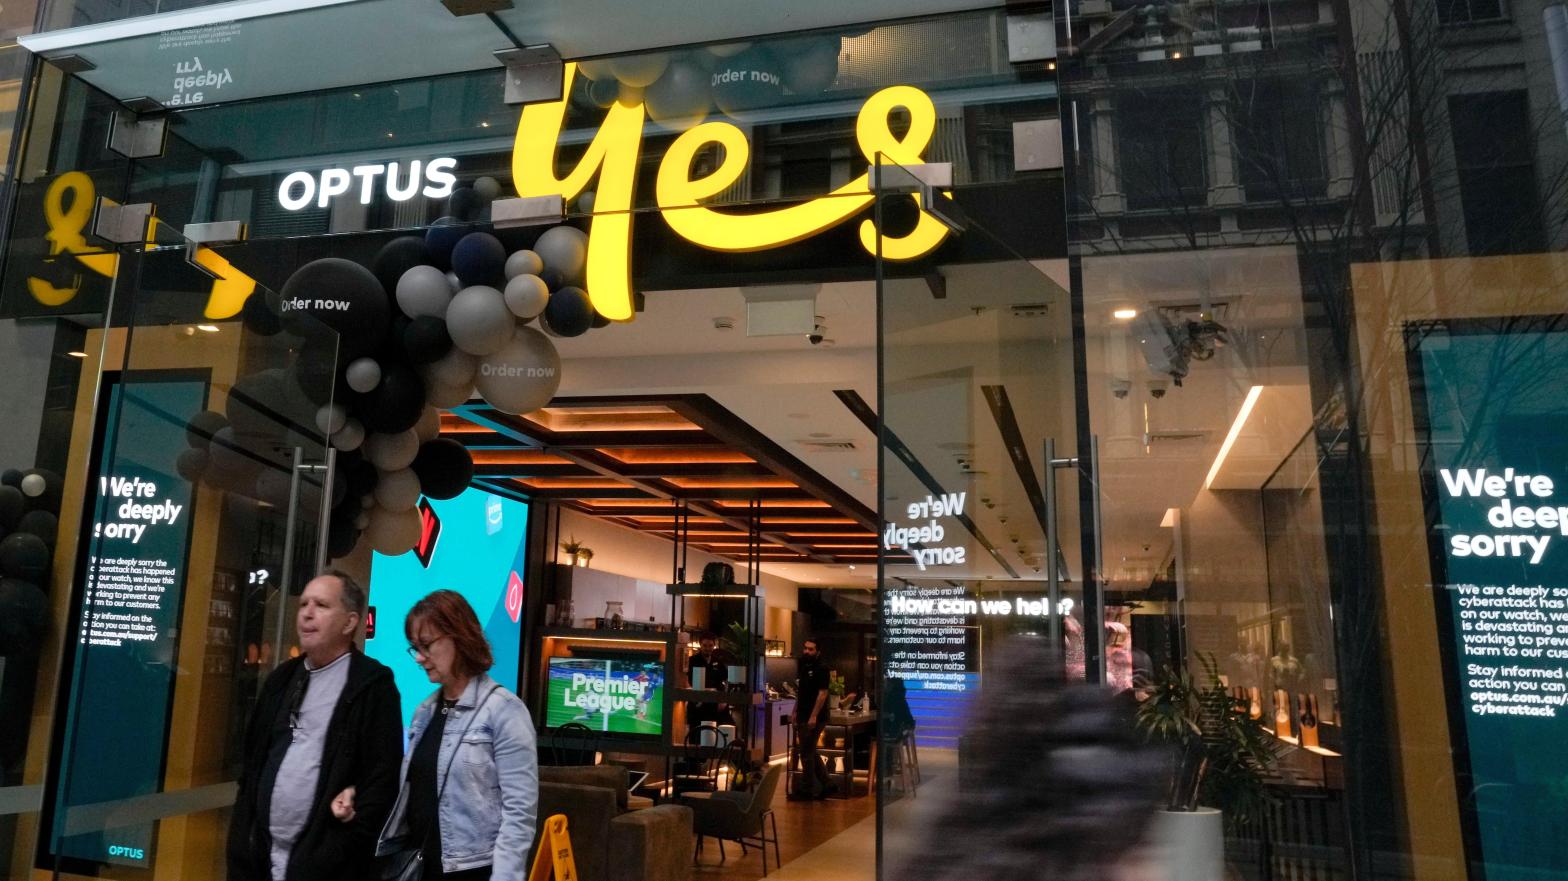 Optus customers reported receiving text messages blackmailing them. (Photo: Mark Baker, AP)